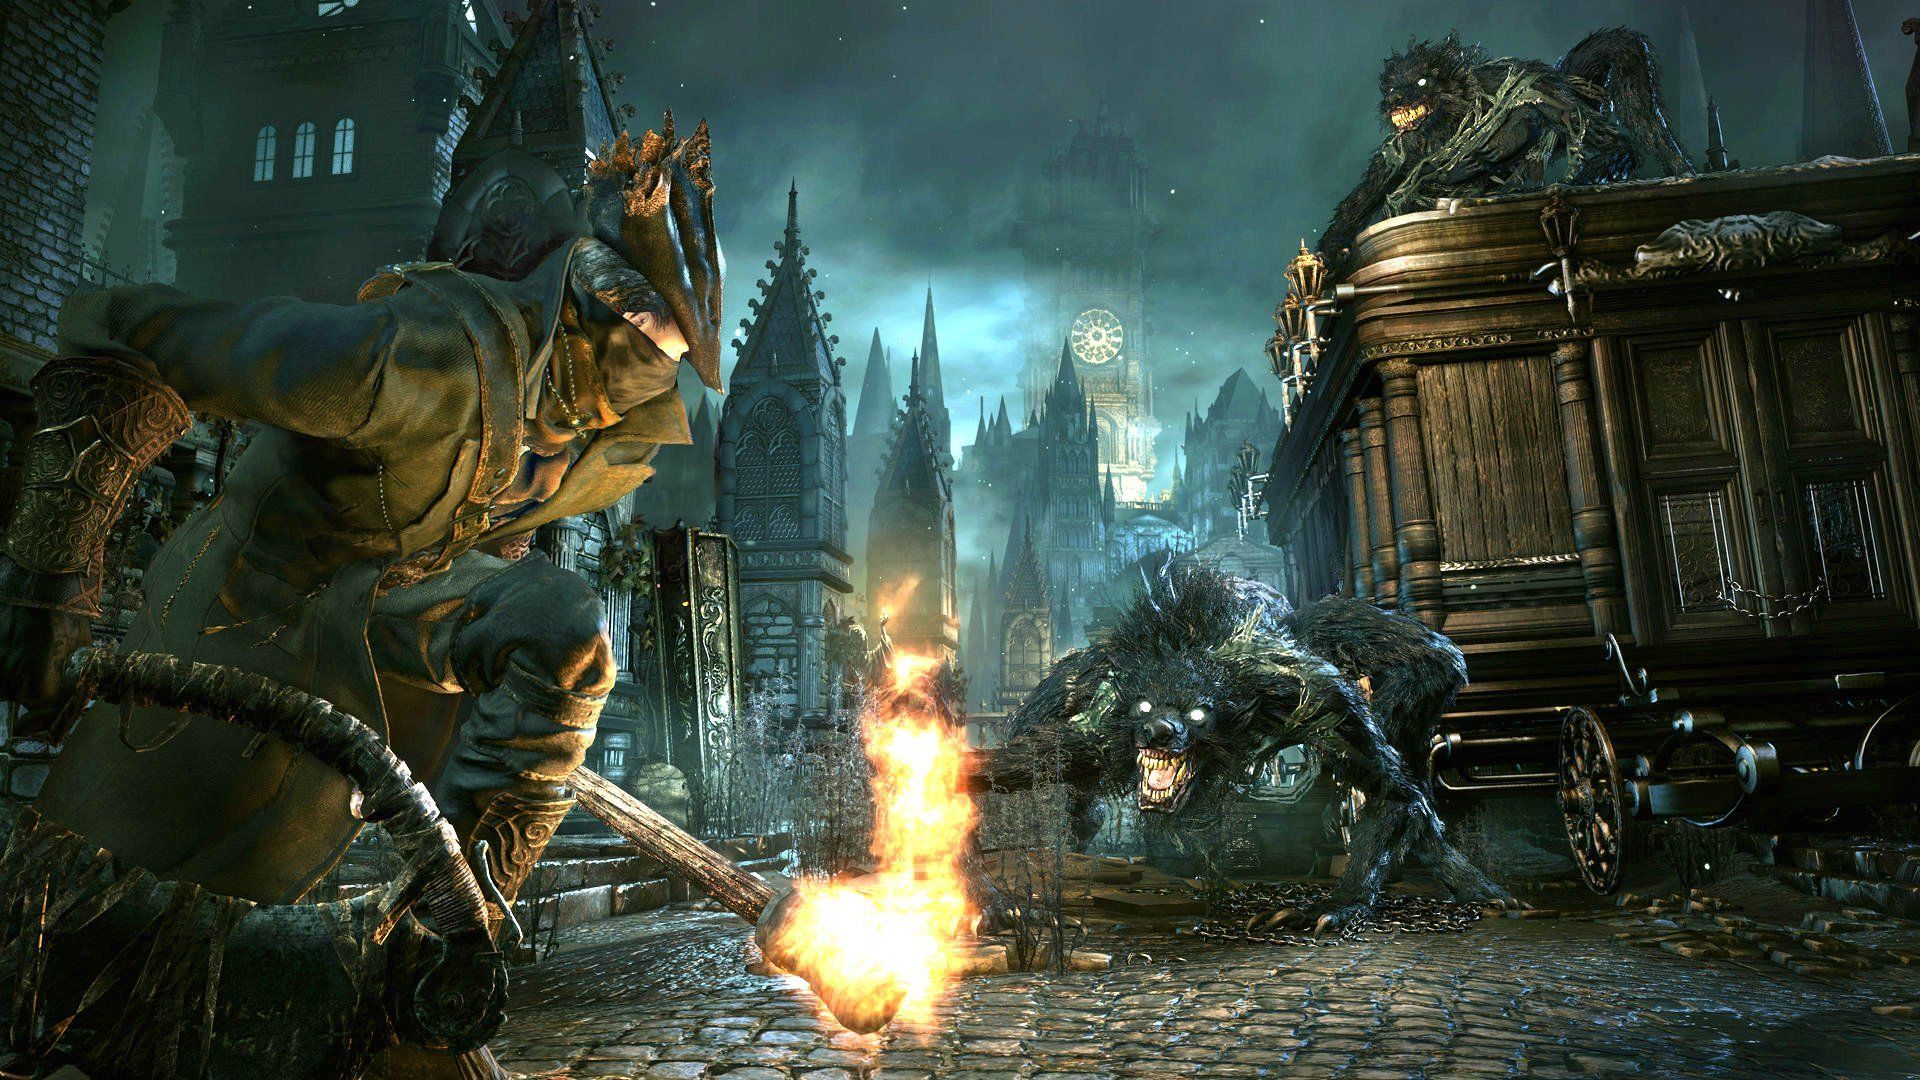 Forget Fallout And Metal Gear, 'Bloodborne' Is My Open World Game Of 2015